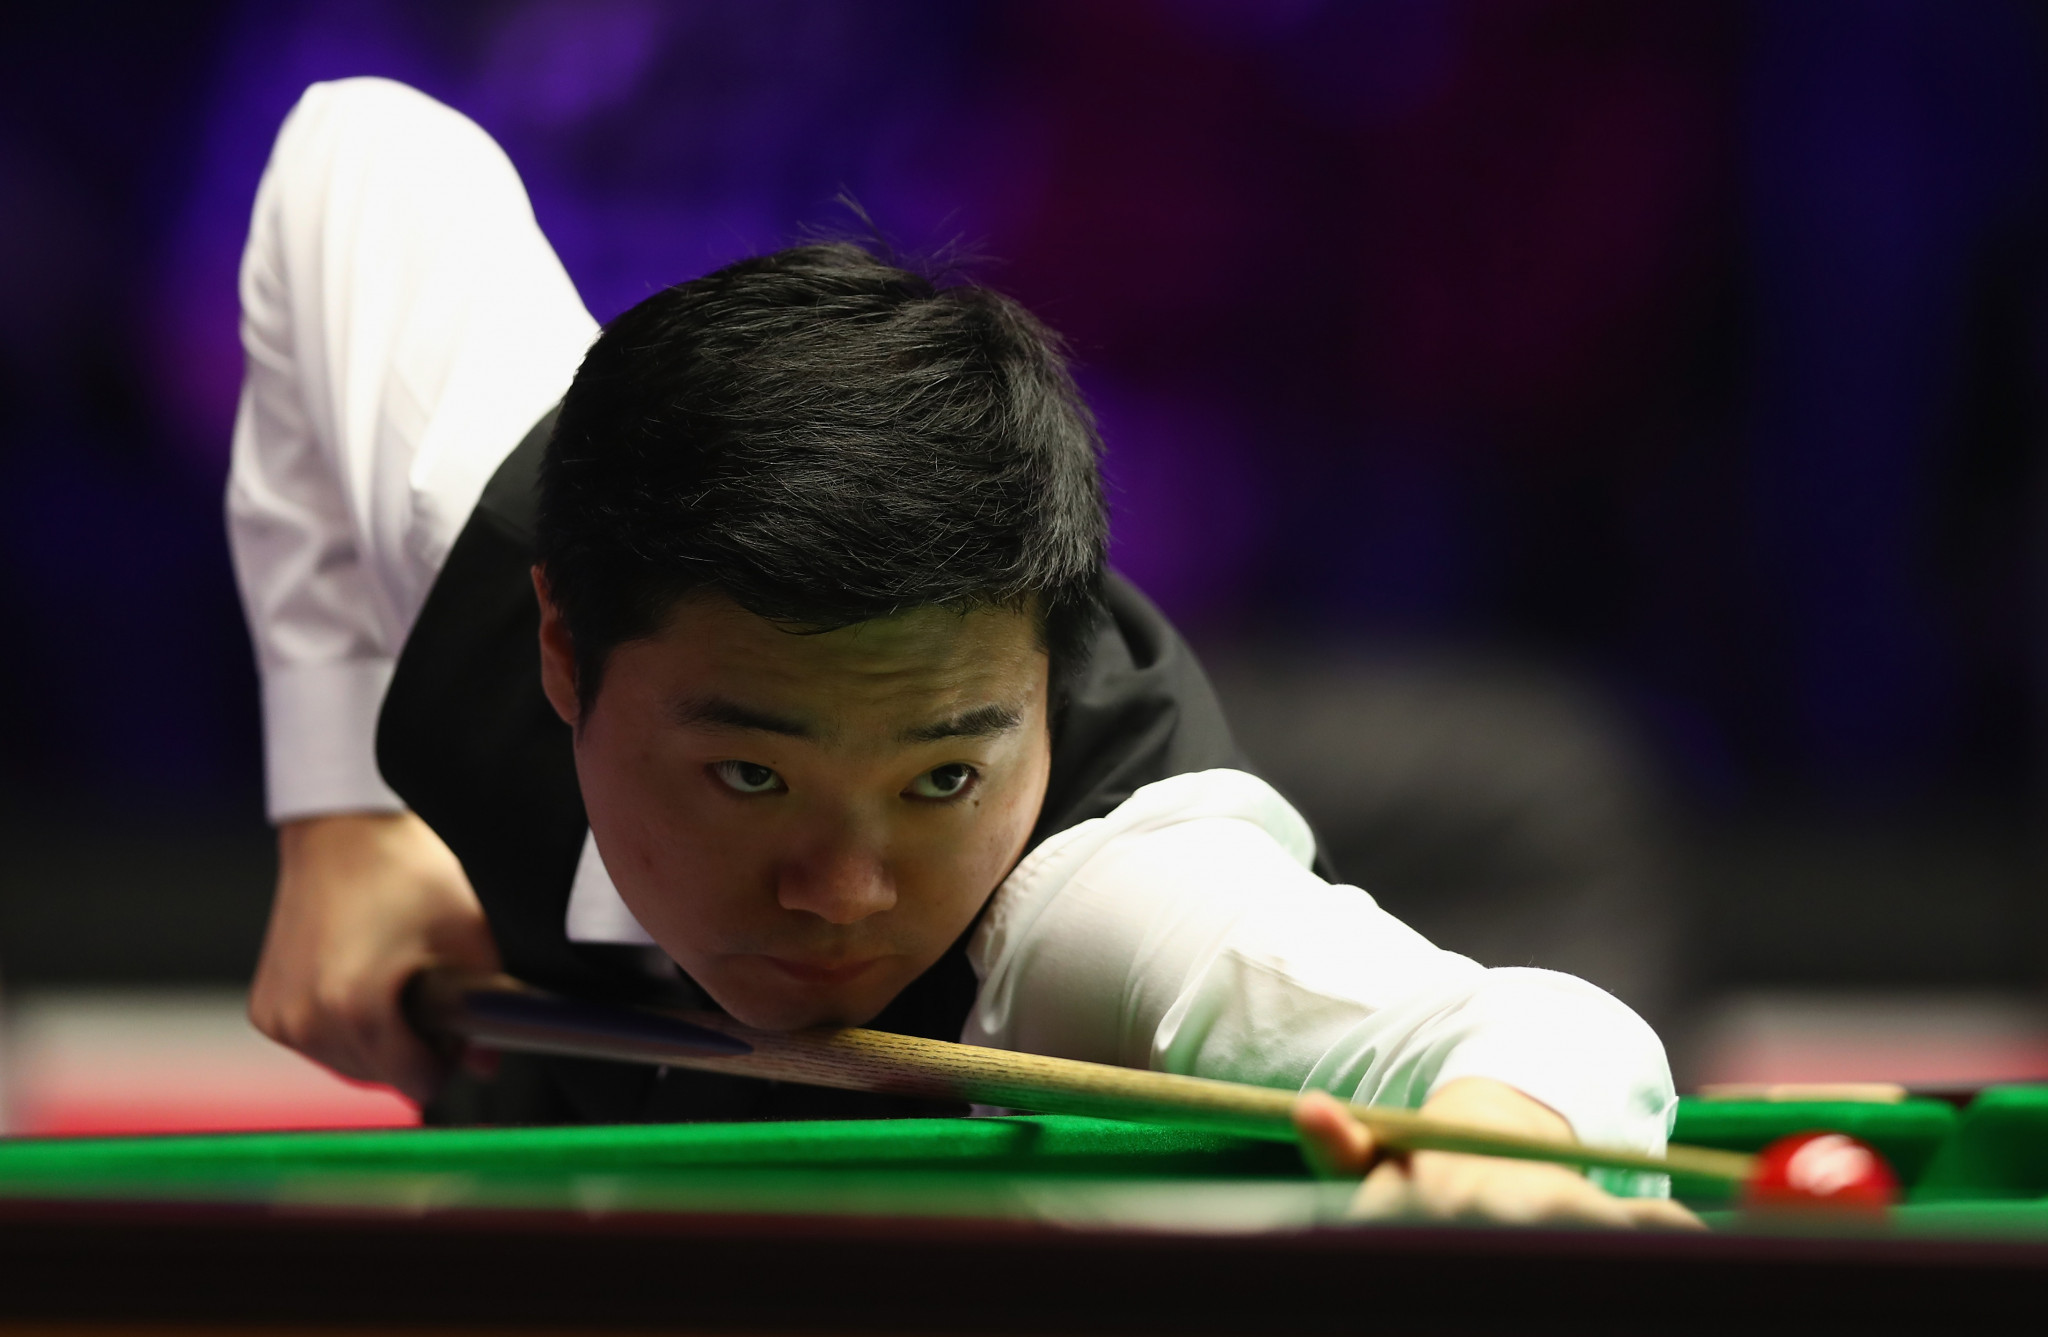 Ding Junhui is now the favourite for the title at the World Snooker Championship in Sheffield after reaching the quarter-final ©Getty Images